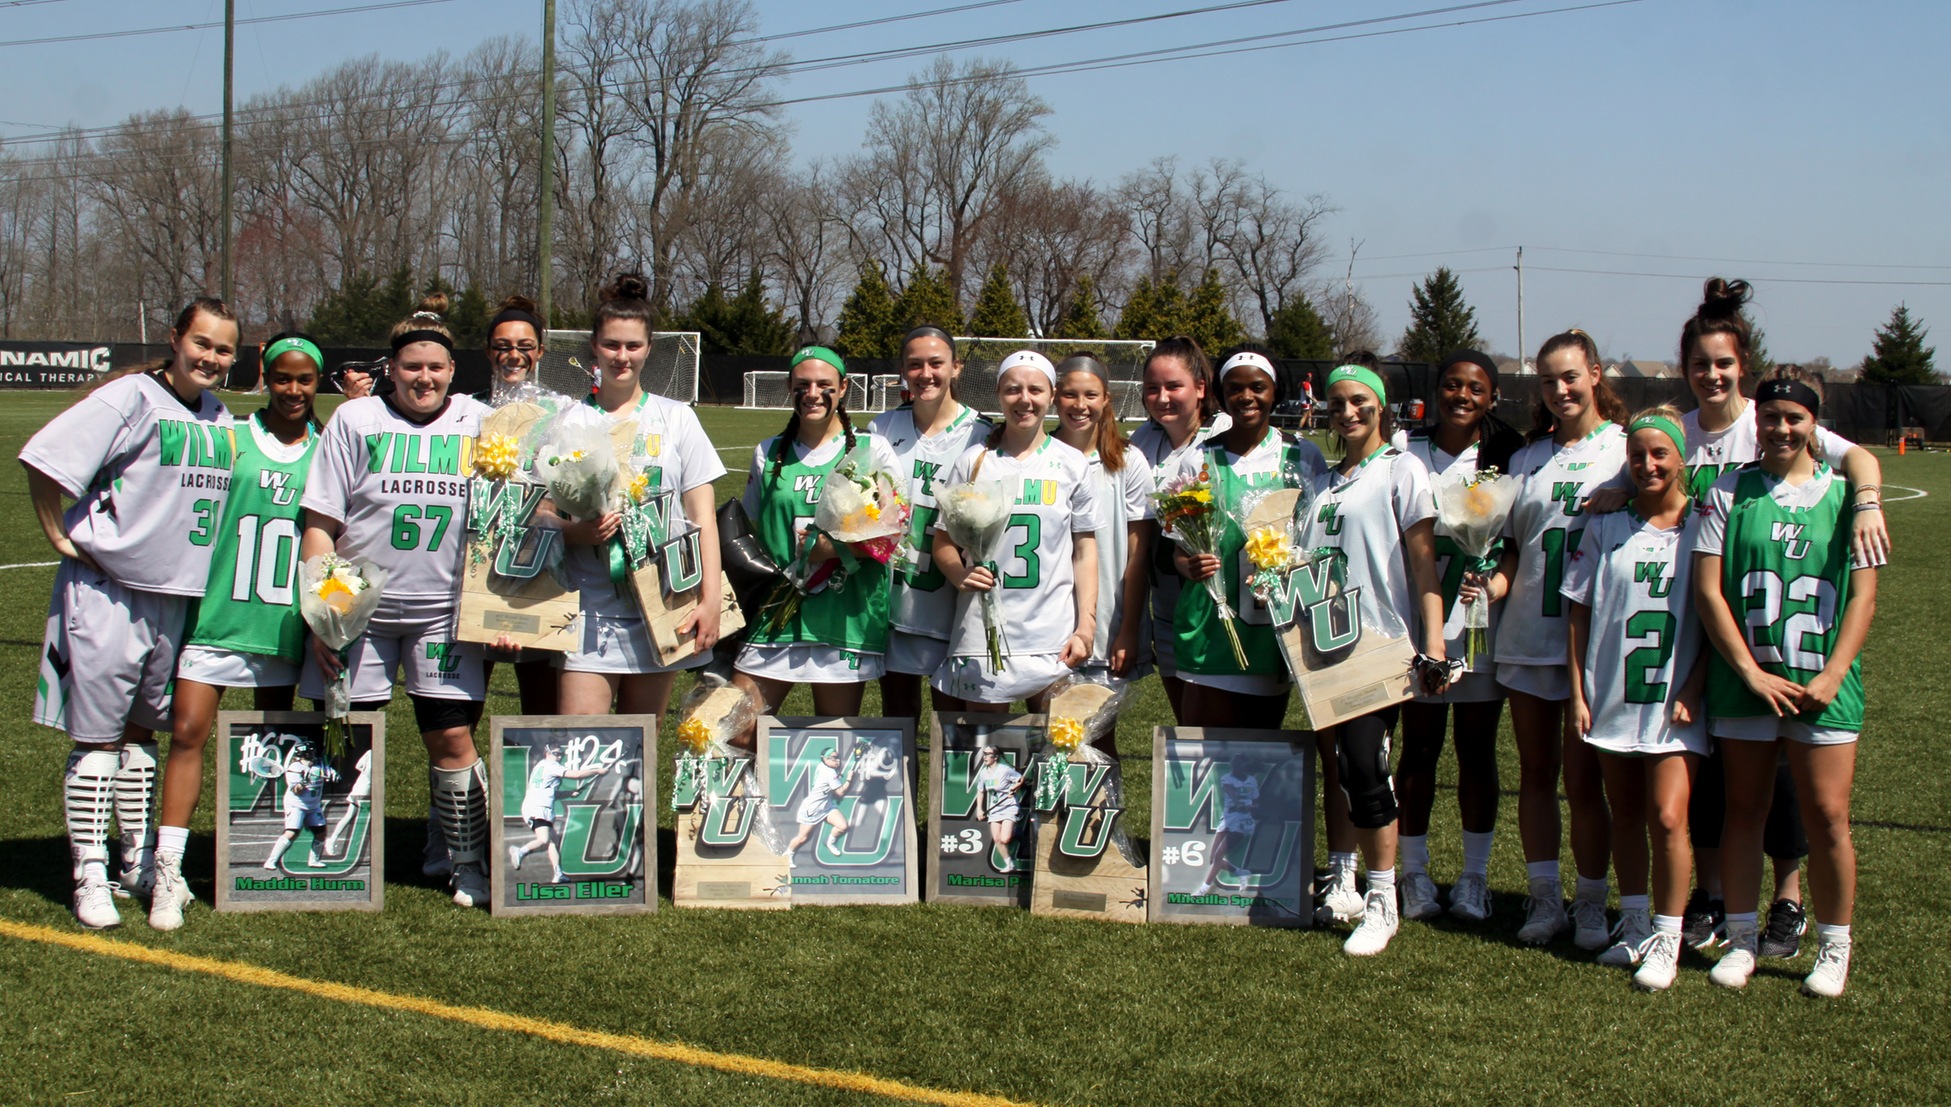 Women’s Lacrosse Win Third Straight with 19-6 Win over Nyack on Senior Day